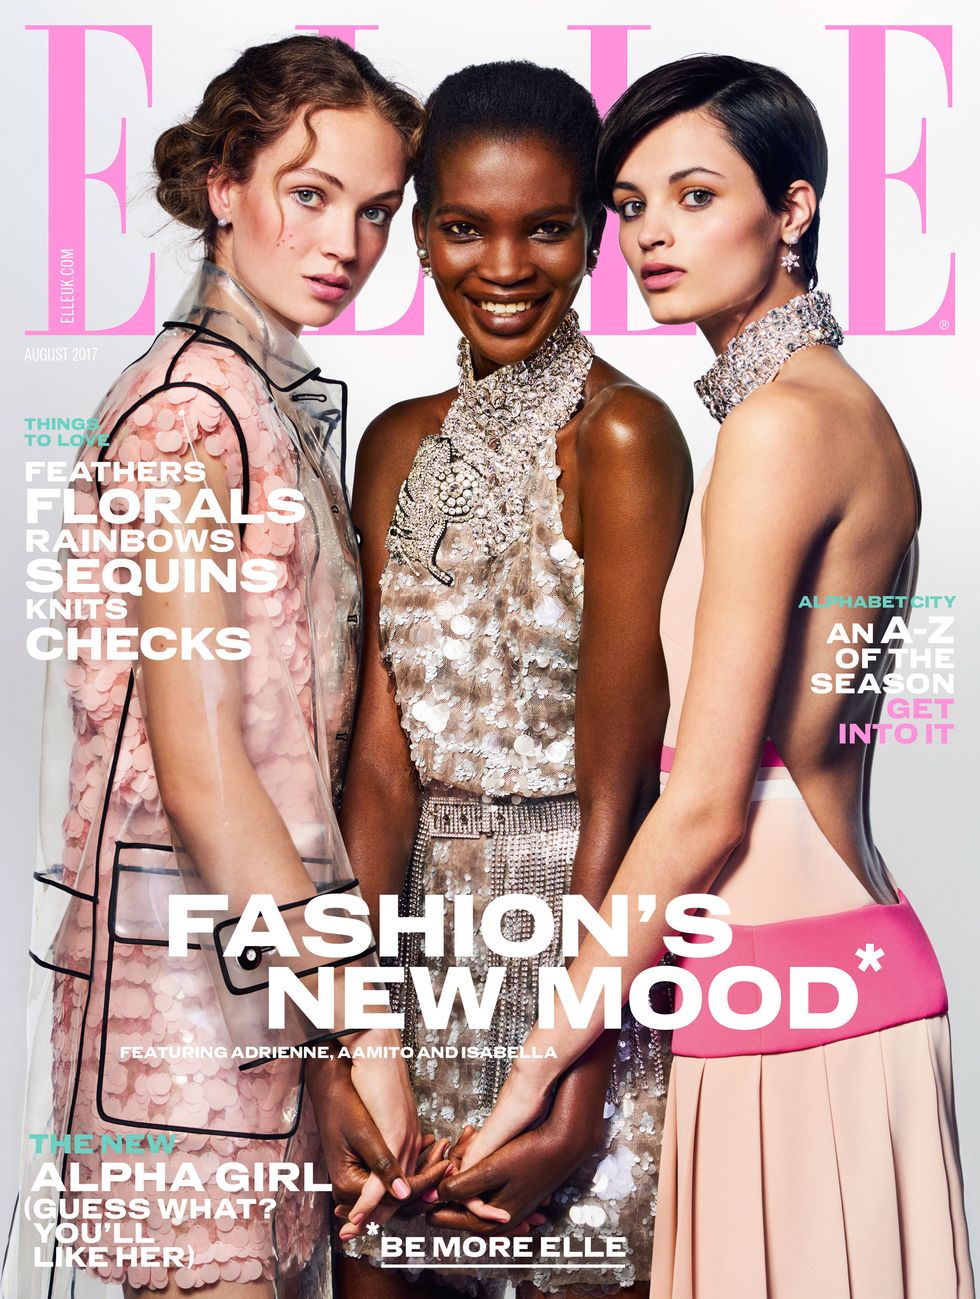 The August cover of ELLE photographed by Liz Collins